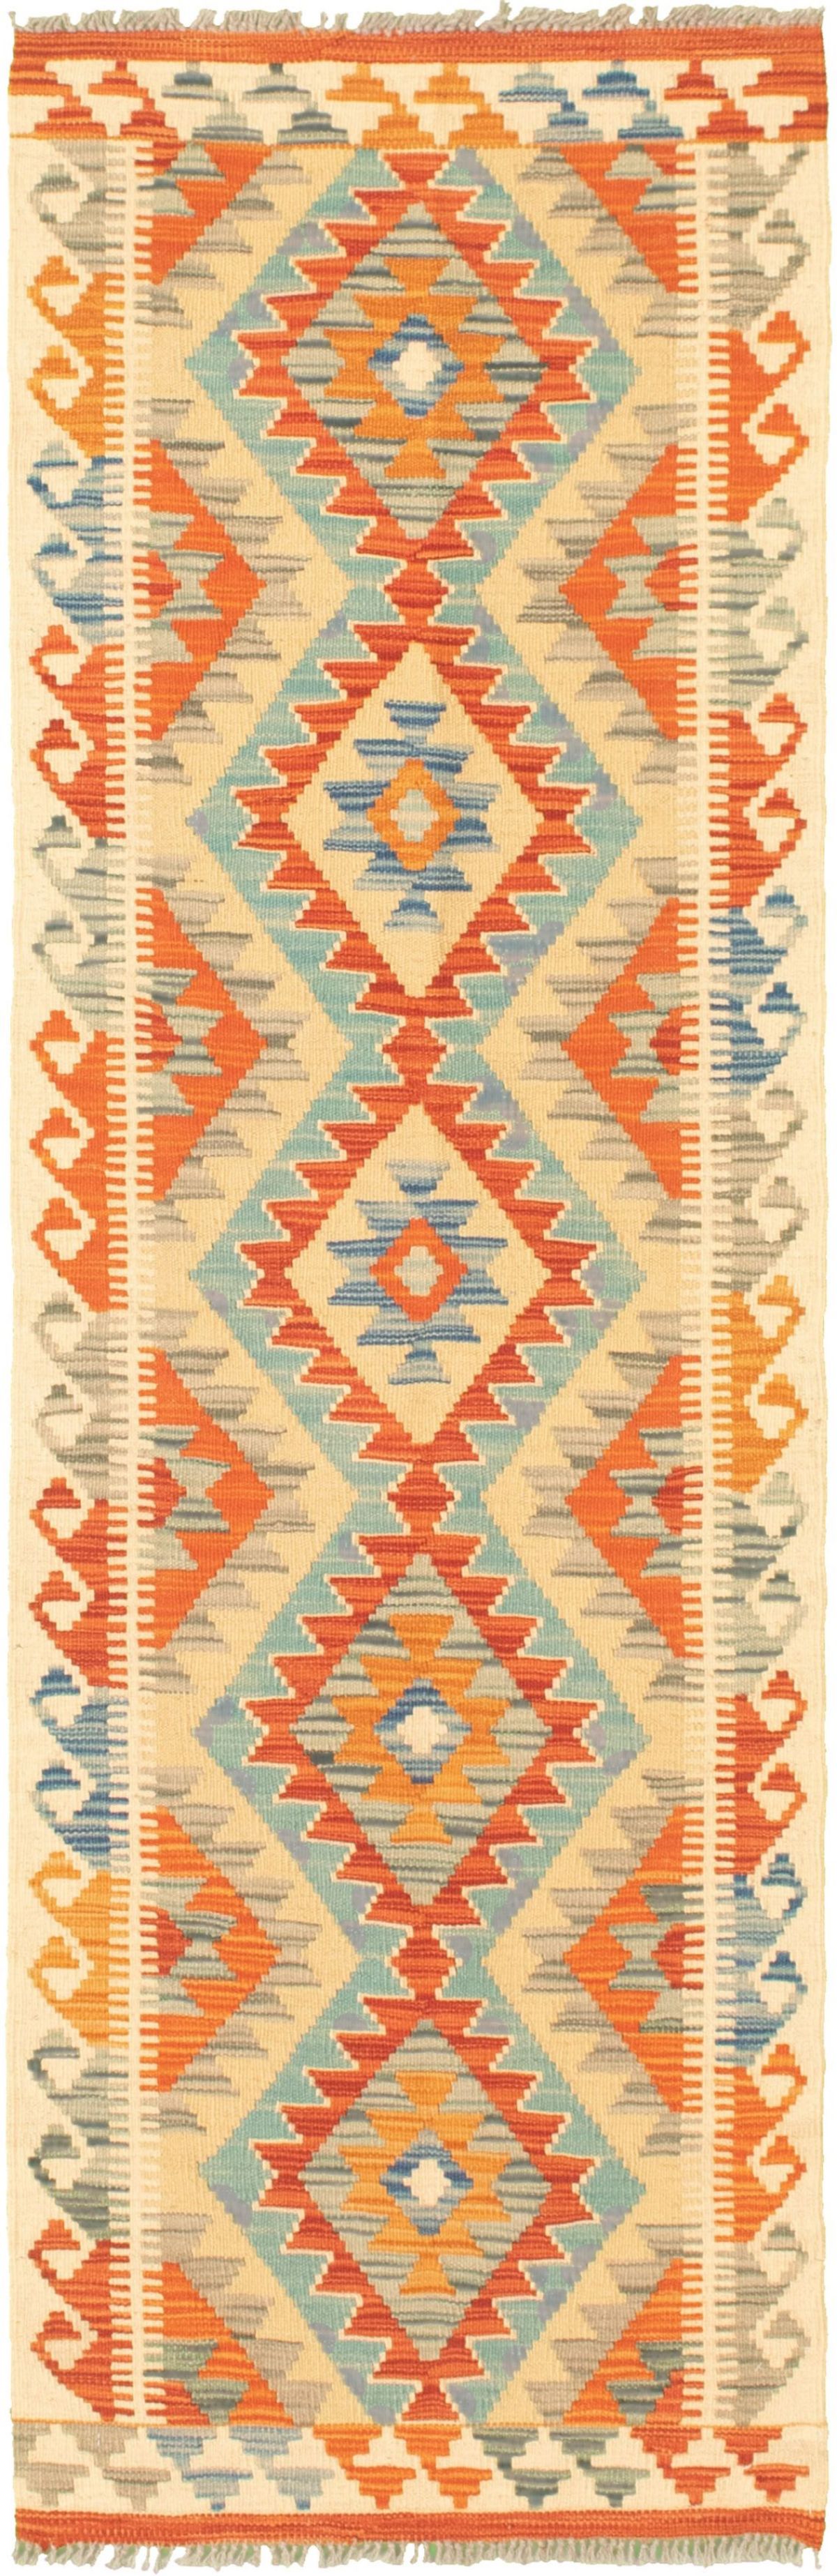 Hand woven Bold and Colorful  Cream Wool Kilim 2'1" x 6'9" Size: 2'1" x 6'9"  